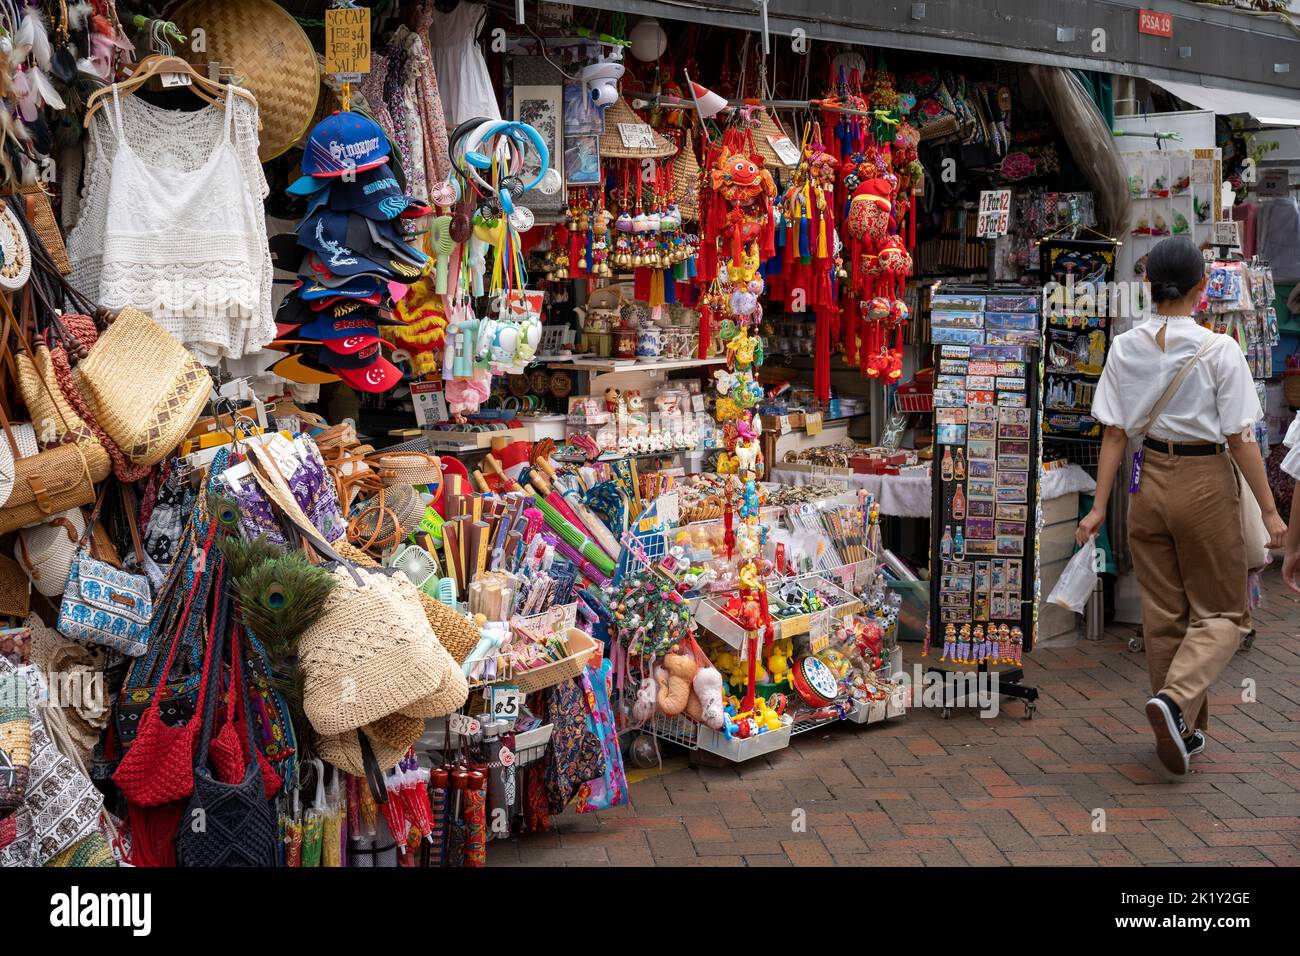 Locals and tourists shopping at street stalls on Pagoda Street, Chinatown Singapore Stock Photo